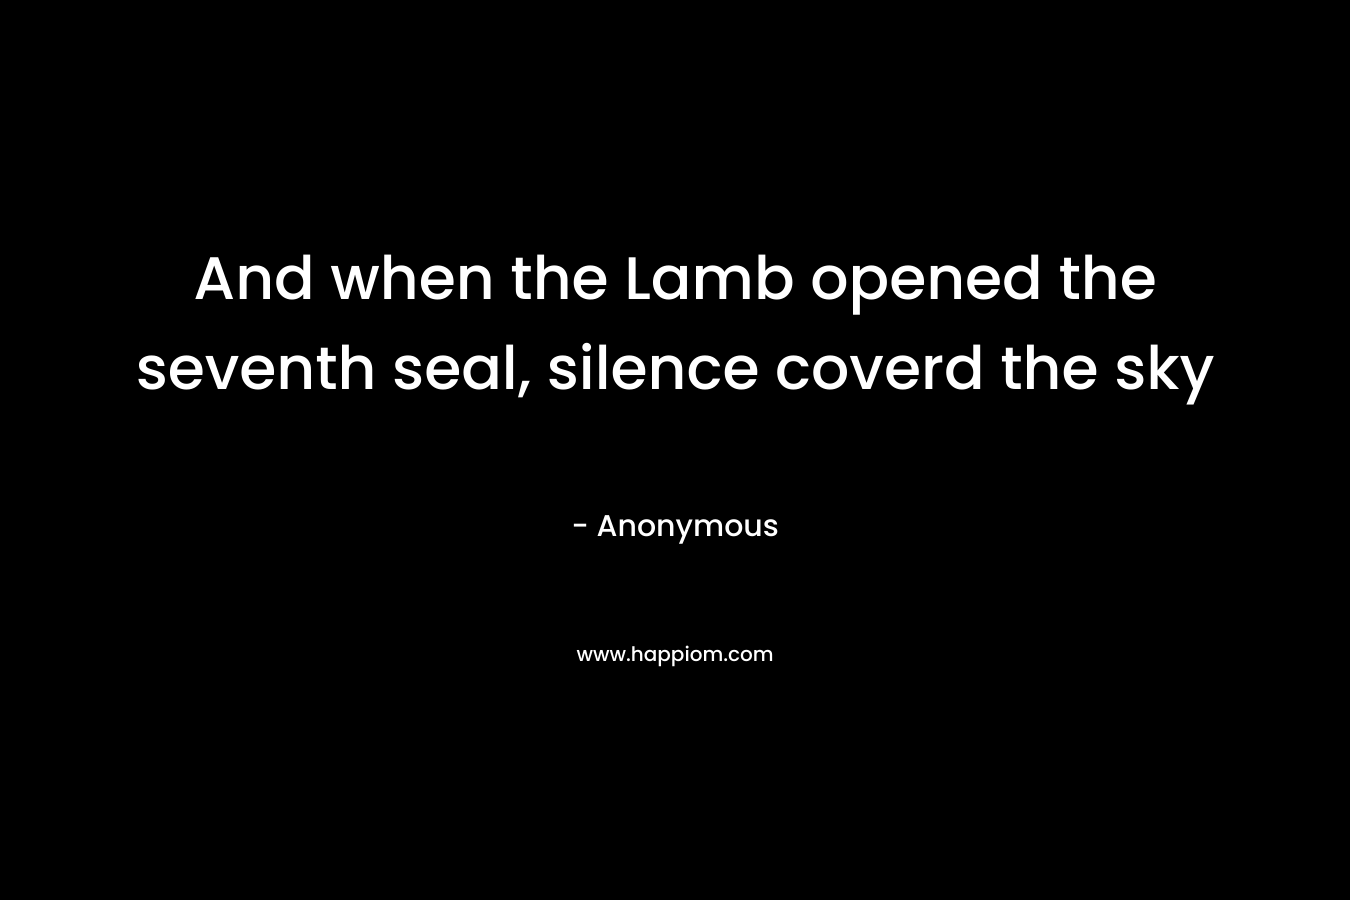 And when the Lamb opened the seventh seal, silence coverd the sky